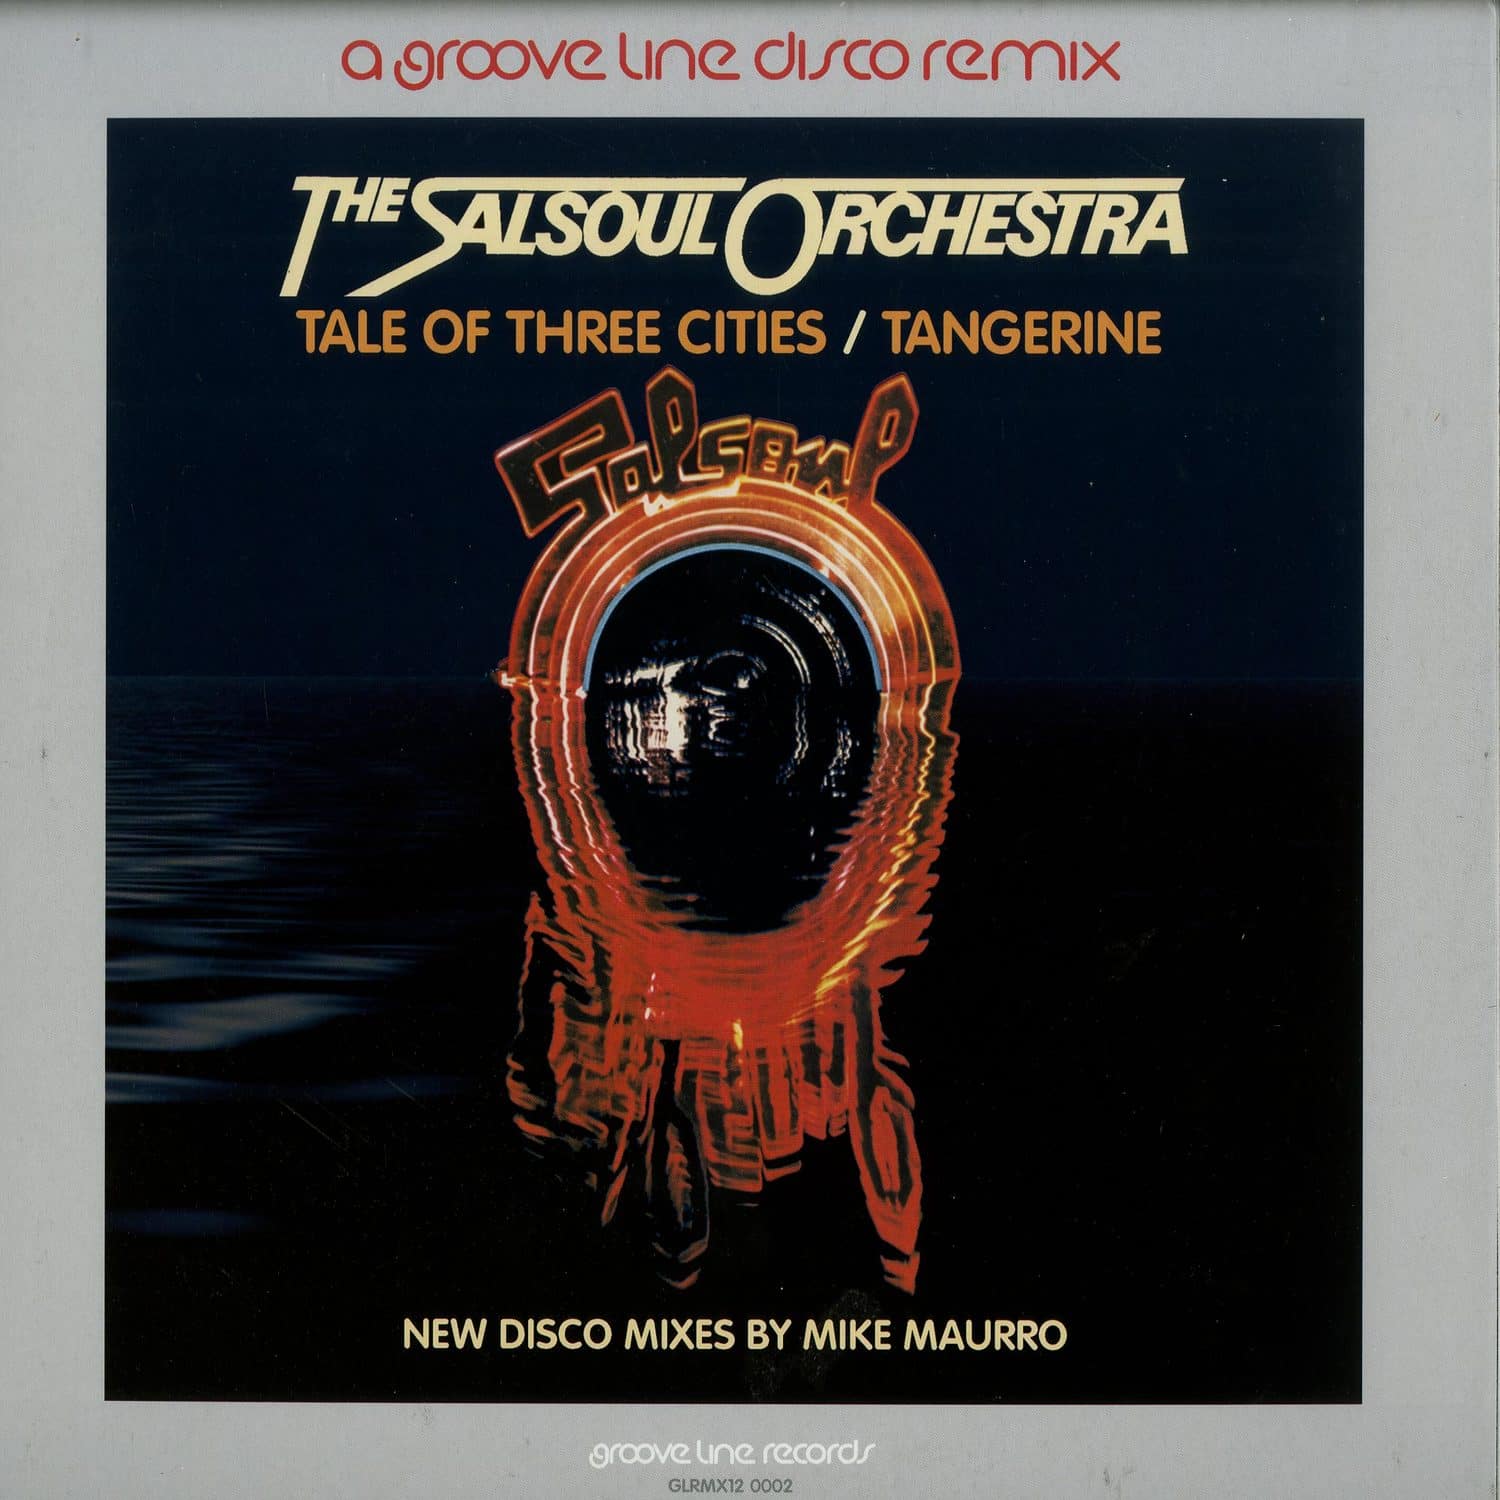 The Salsoul Orchestra - TALE OF THREE CITIES / TANGERINE 